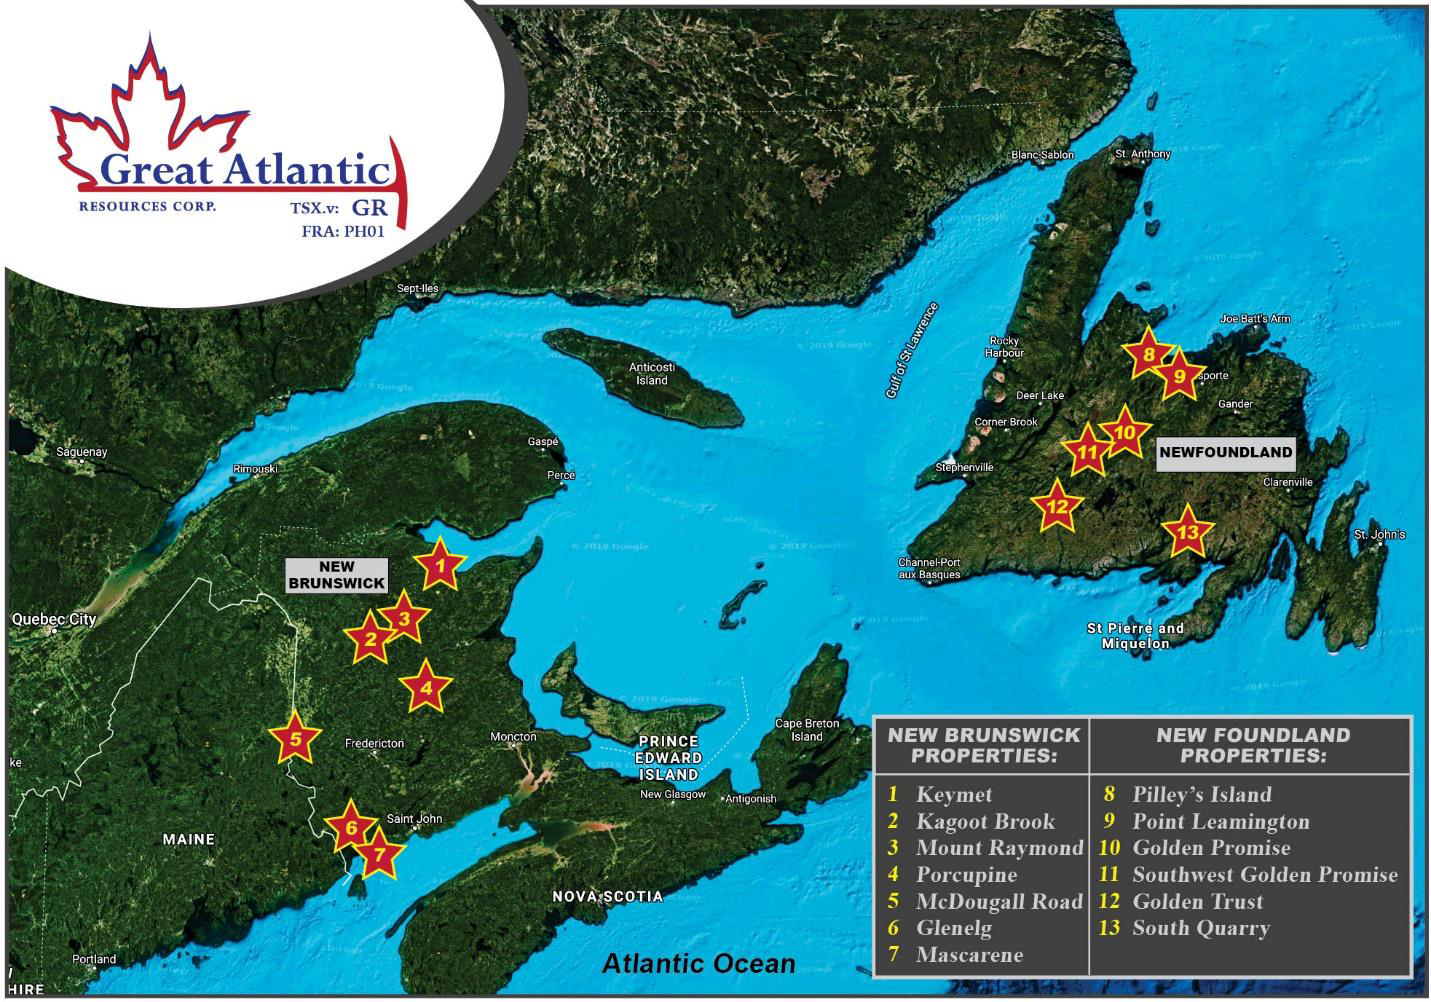 Great Atlantic Resources Corp., Thursday, February 18, 2021, Press release picture